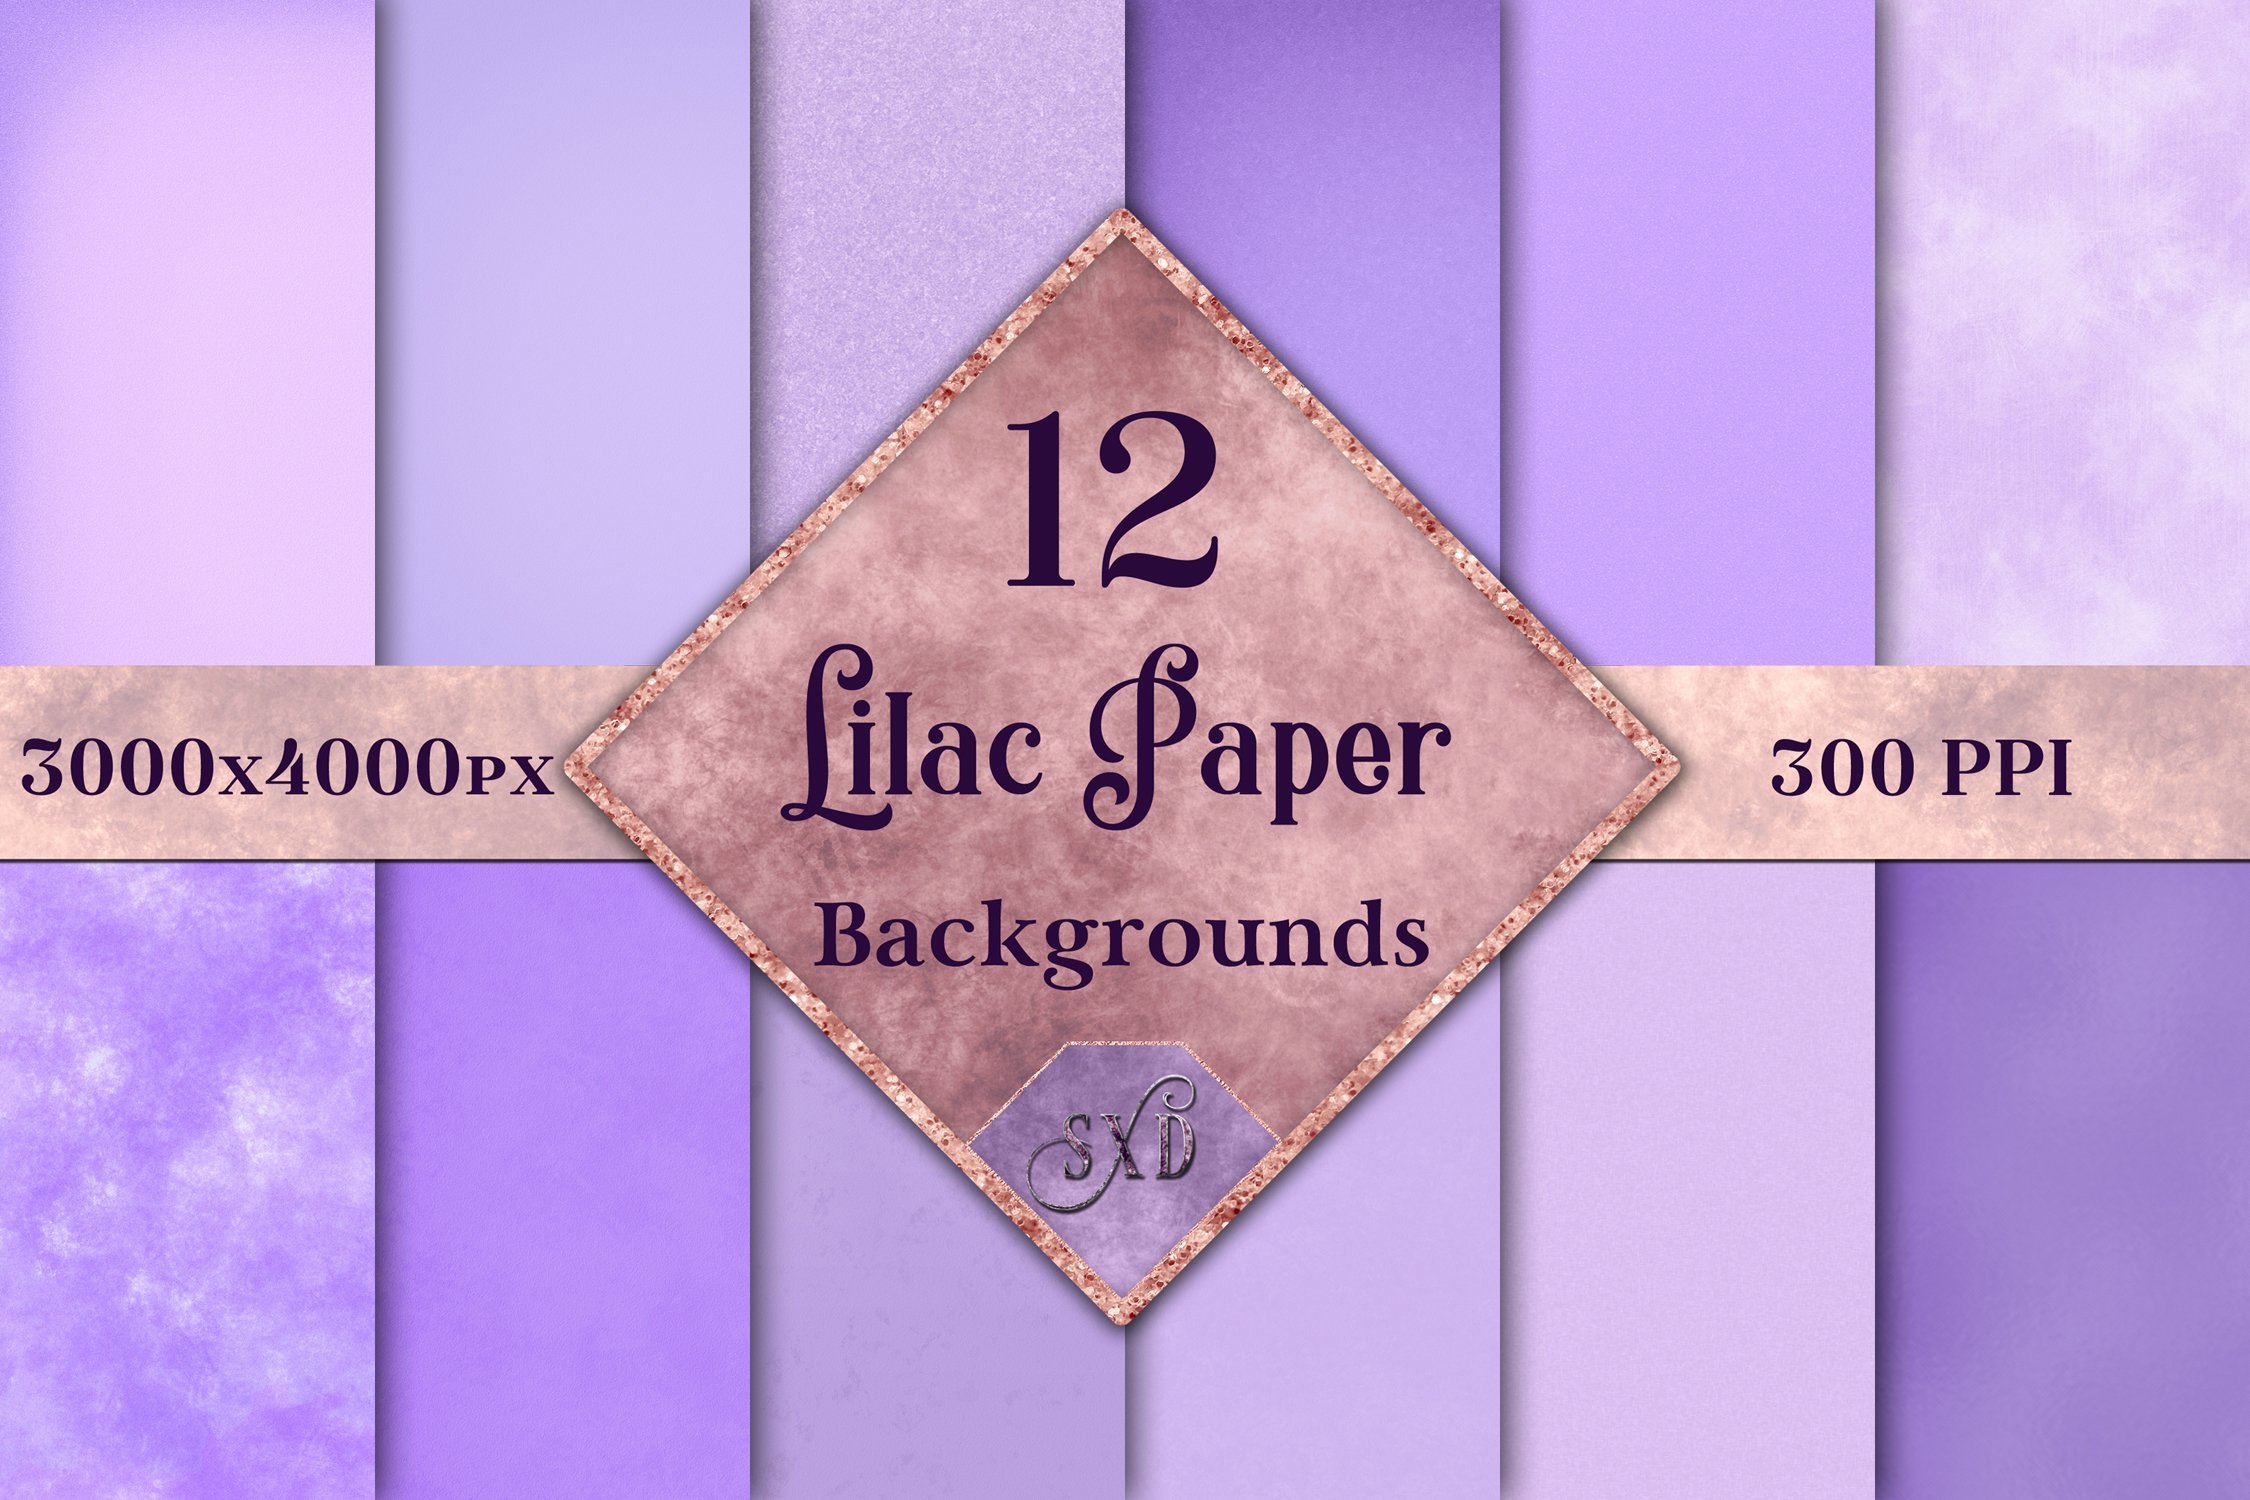 Lilac Paper Backgrounds cover image.